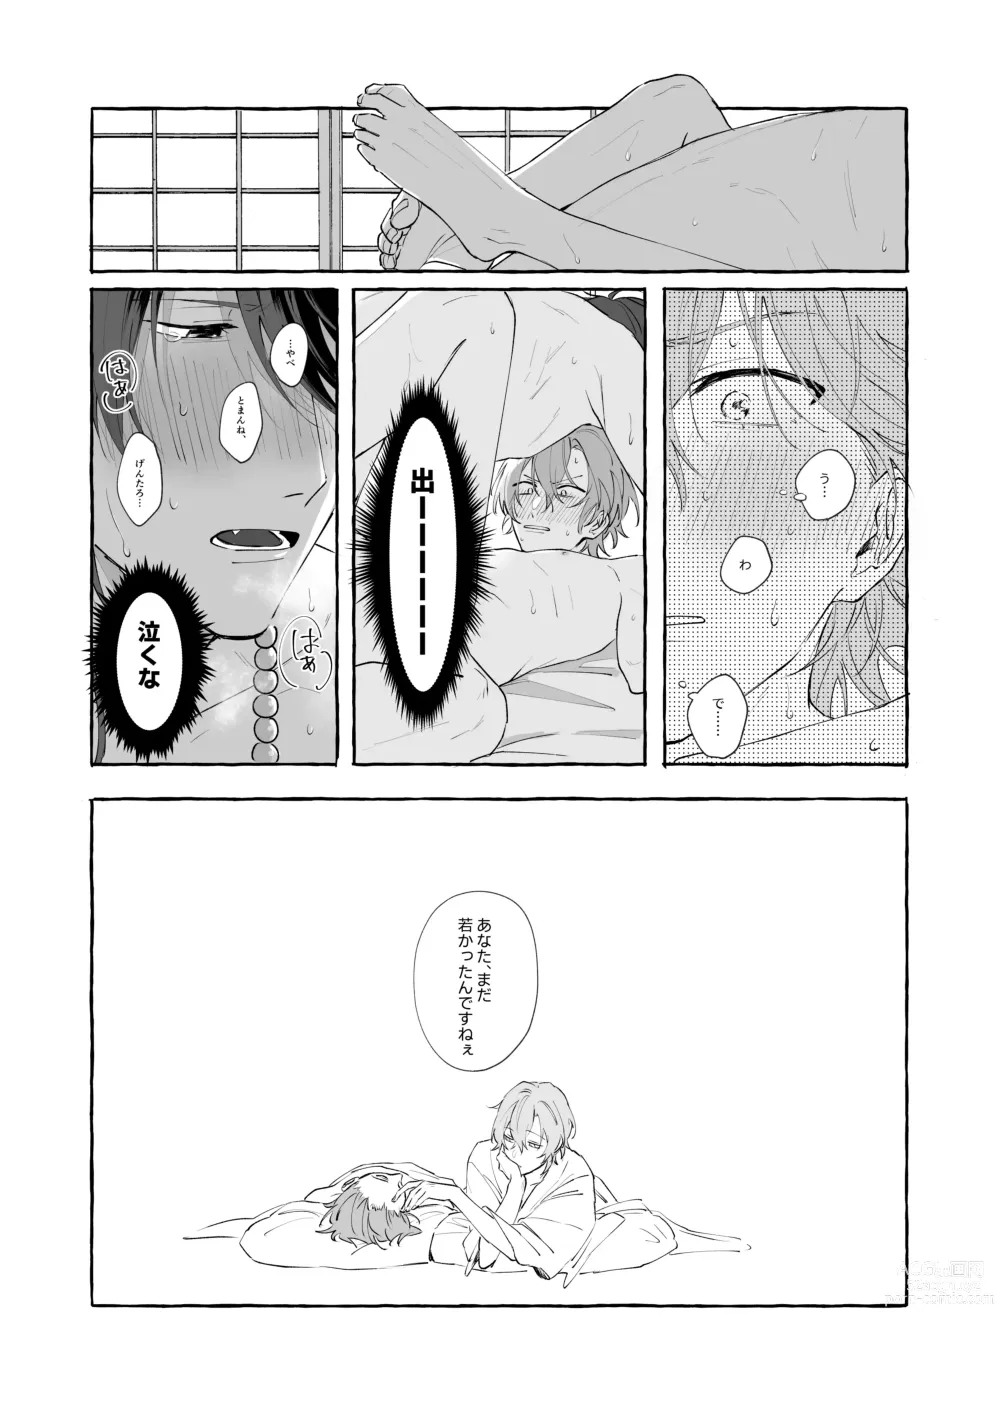 Page 44 of doujinshi Im leaving for good.